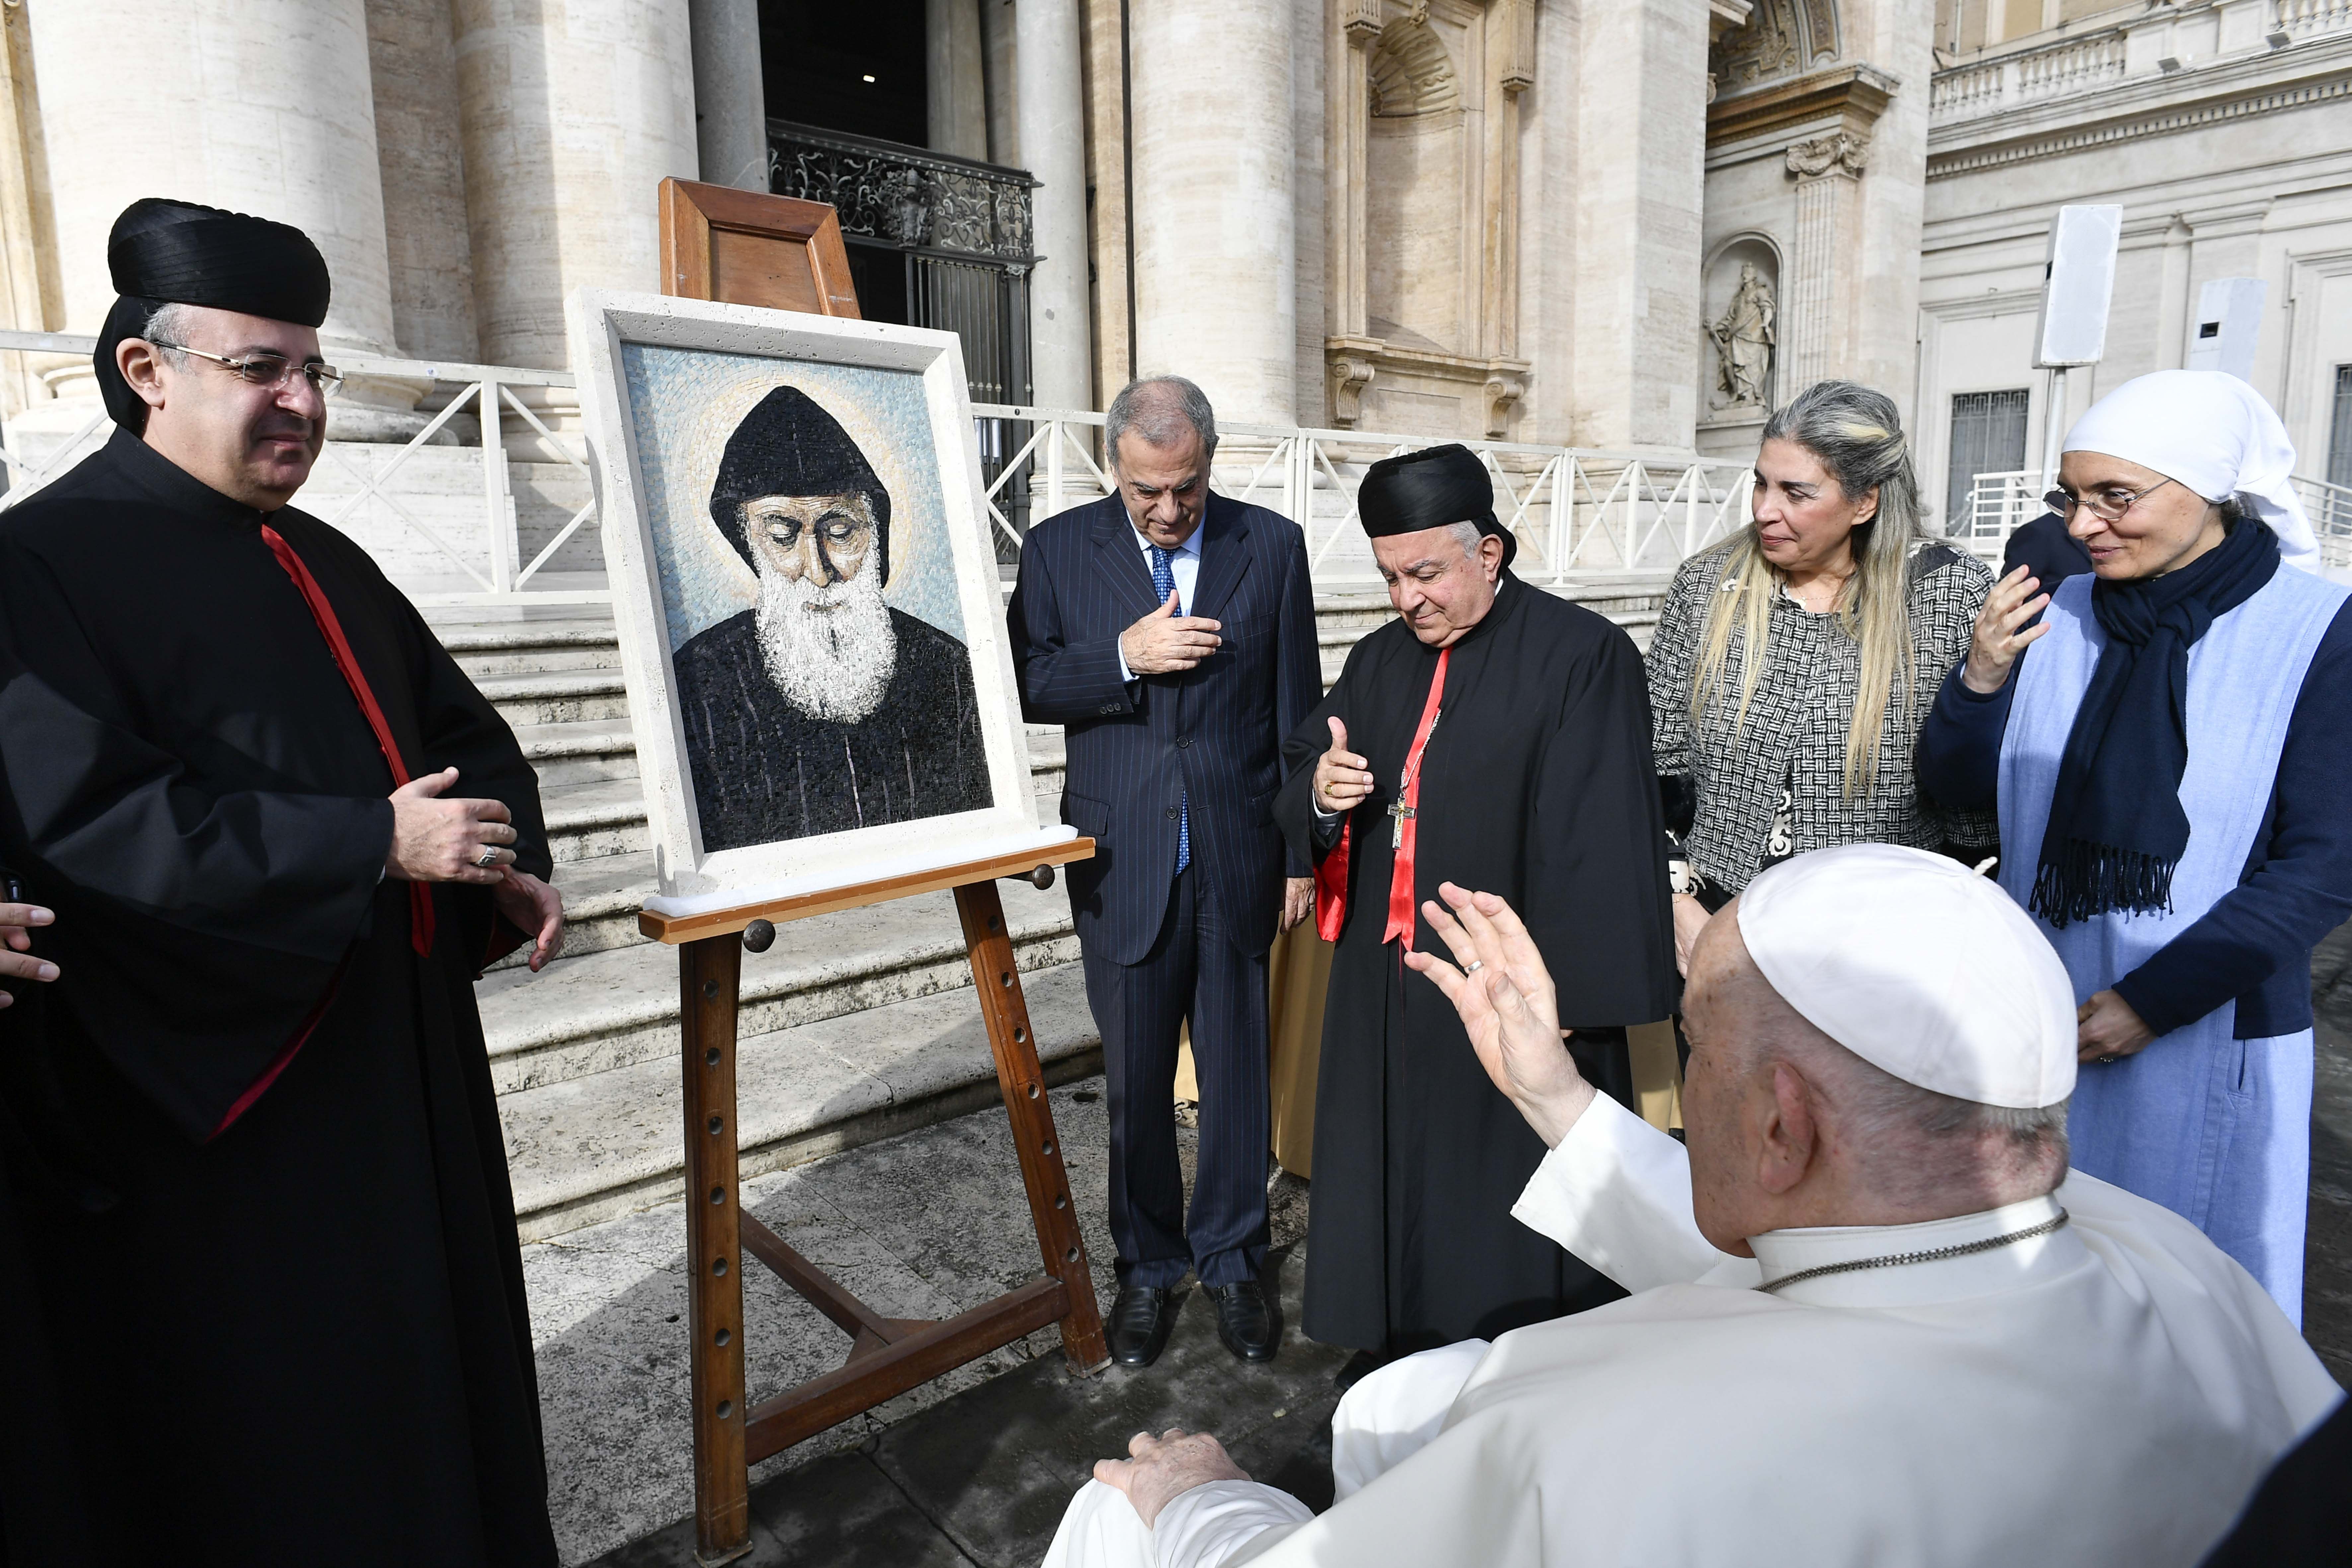 St. Charbel mosaic blessed by Pope Francis installed in Vatican grottoes